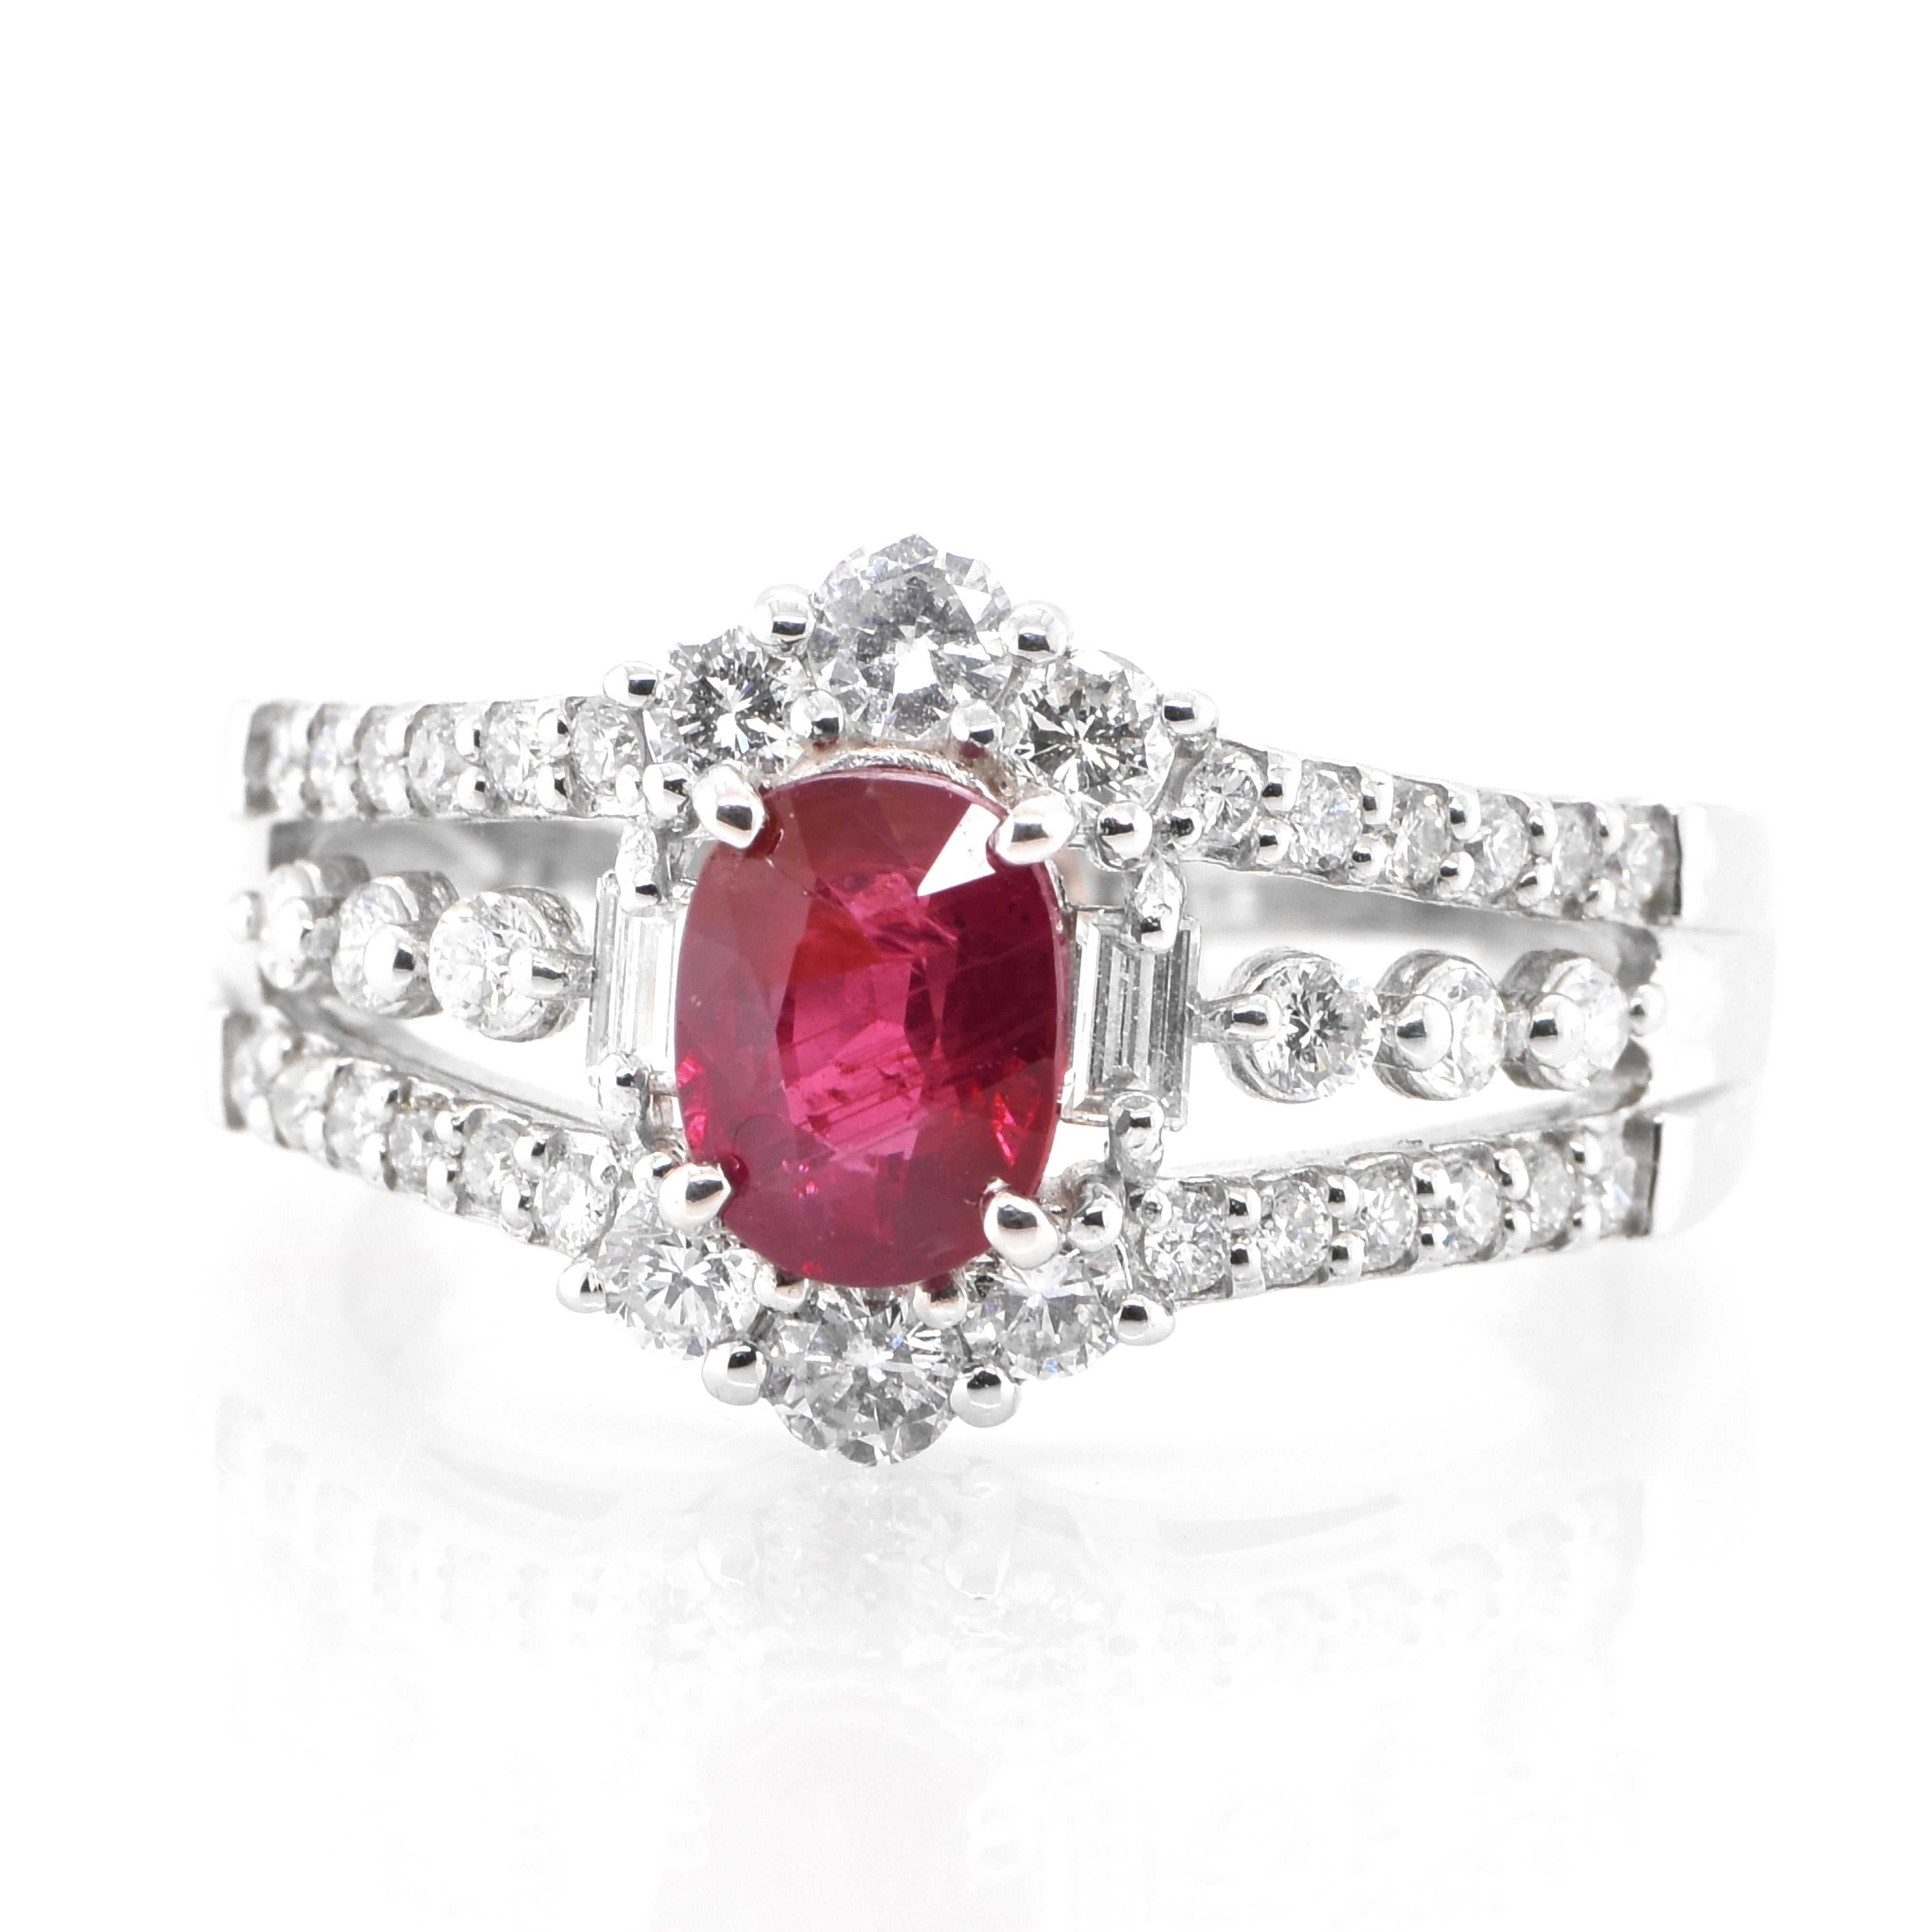 A beautiful ring set in Platinum featuring a GIA Certified 1.20 Carat Natural No Heat Ruby and 0.75 Carat Diamonds. Rubies are referred to as 